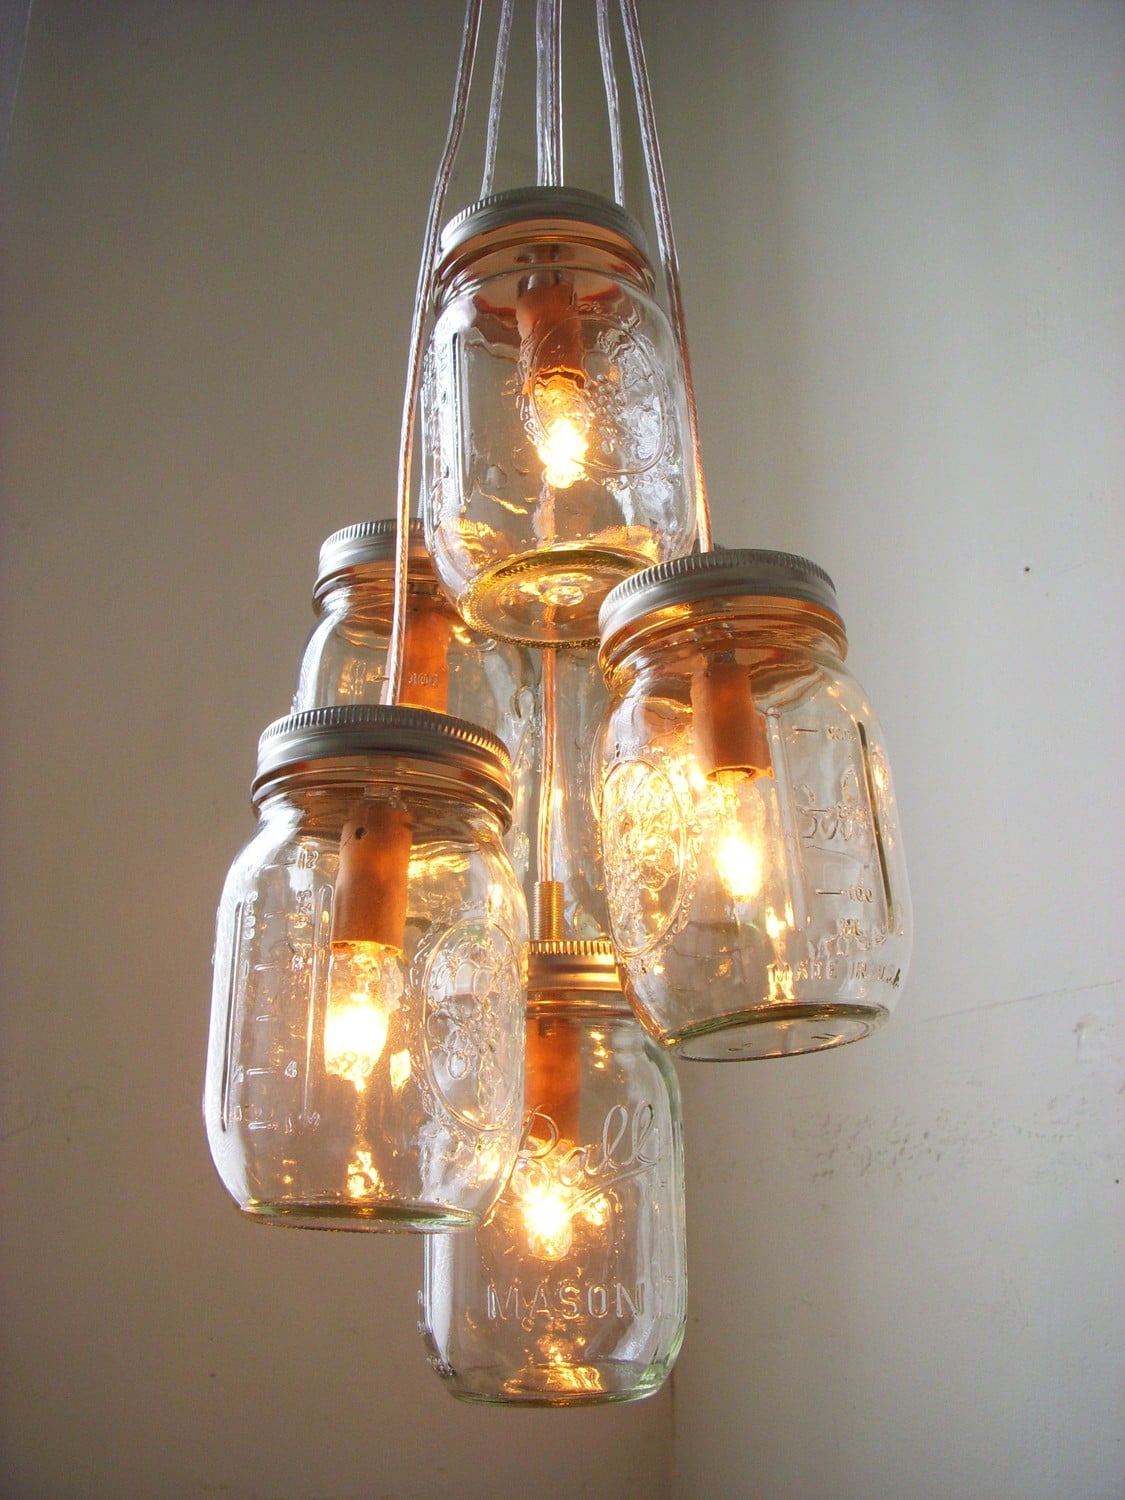 Mason Jar Chandelier | 221 Upcycling Ideas That Will Blow Your Mind ...